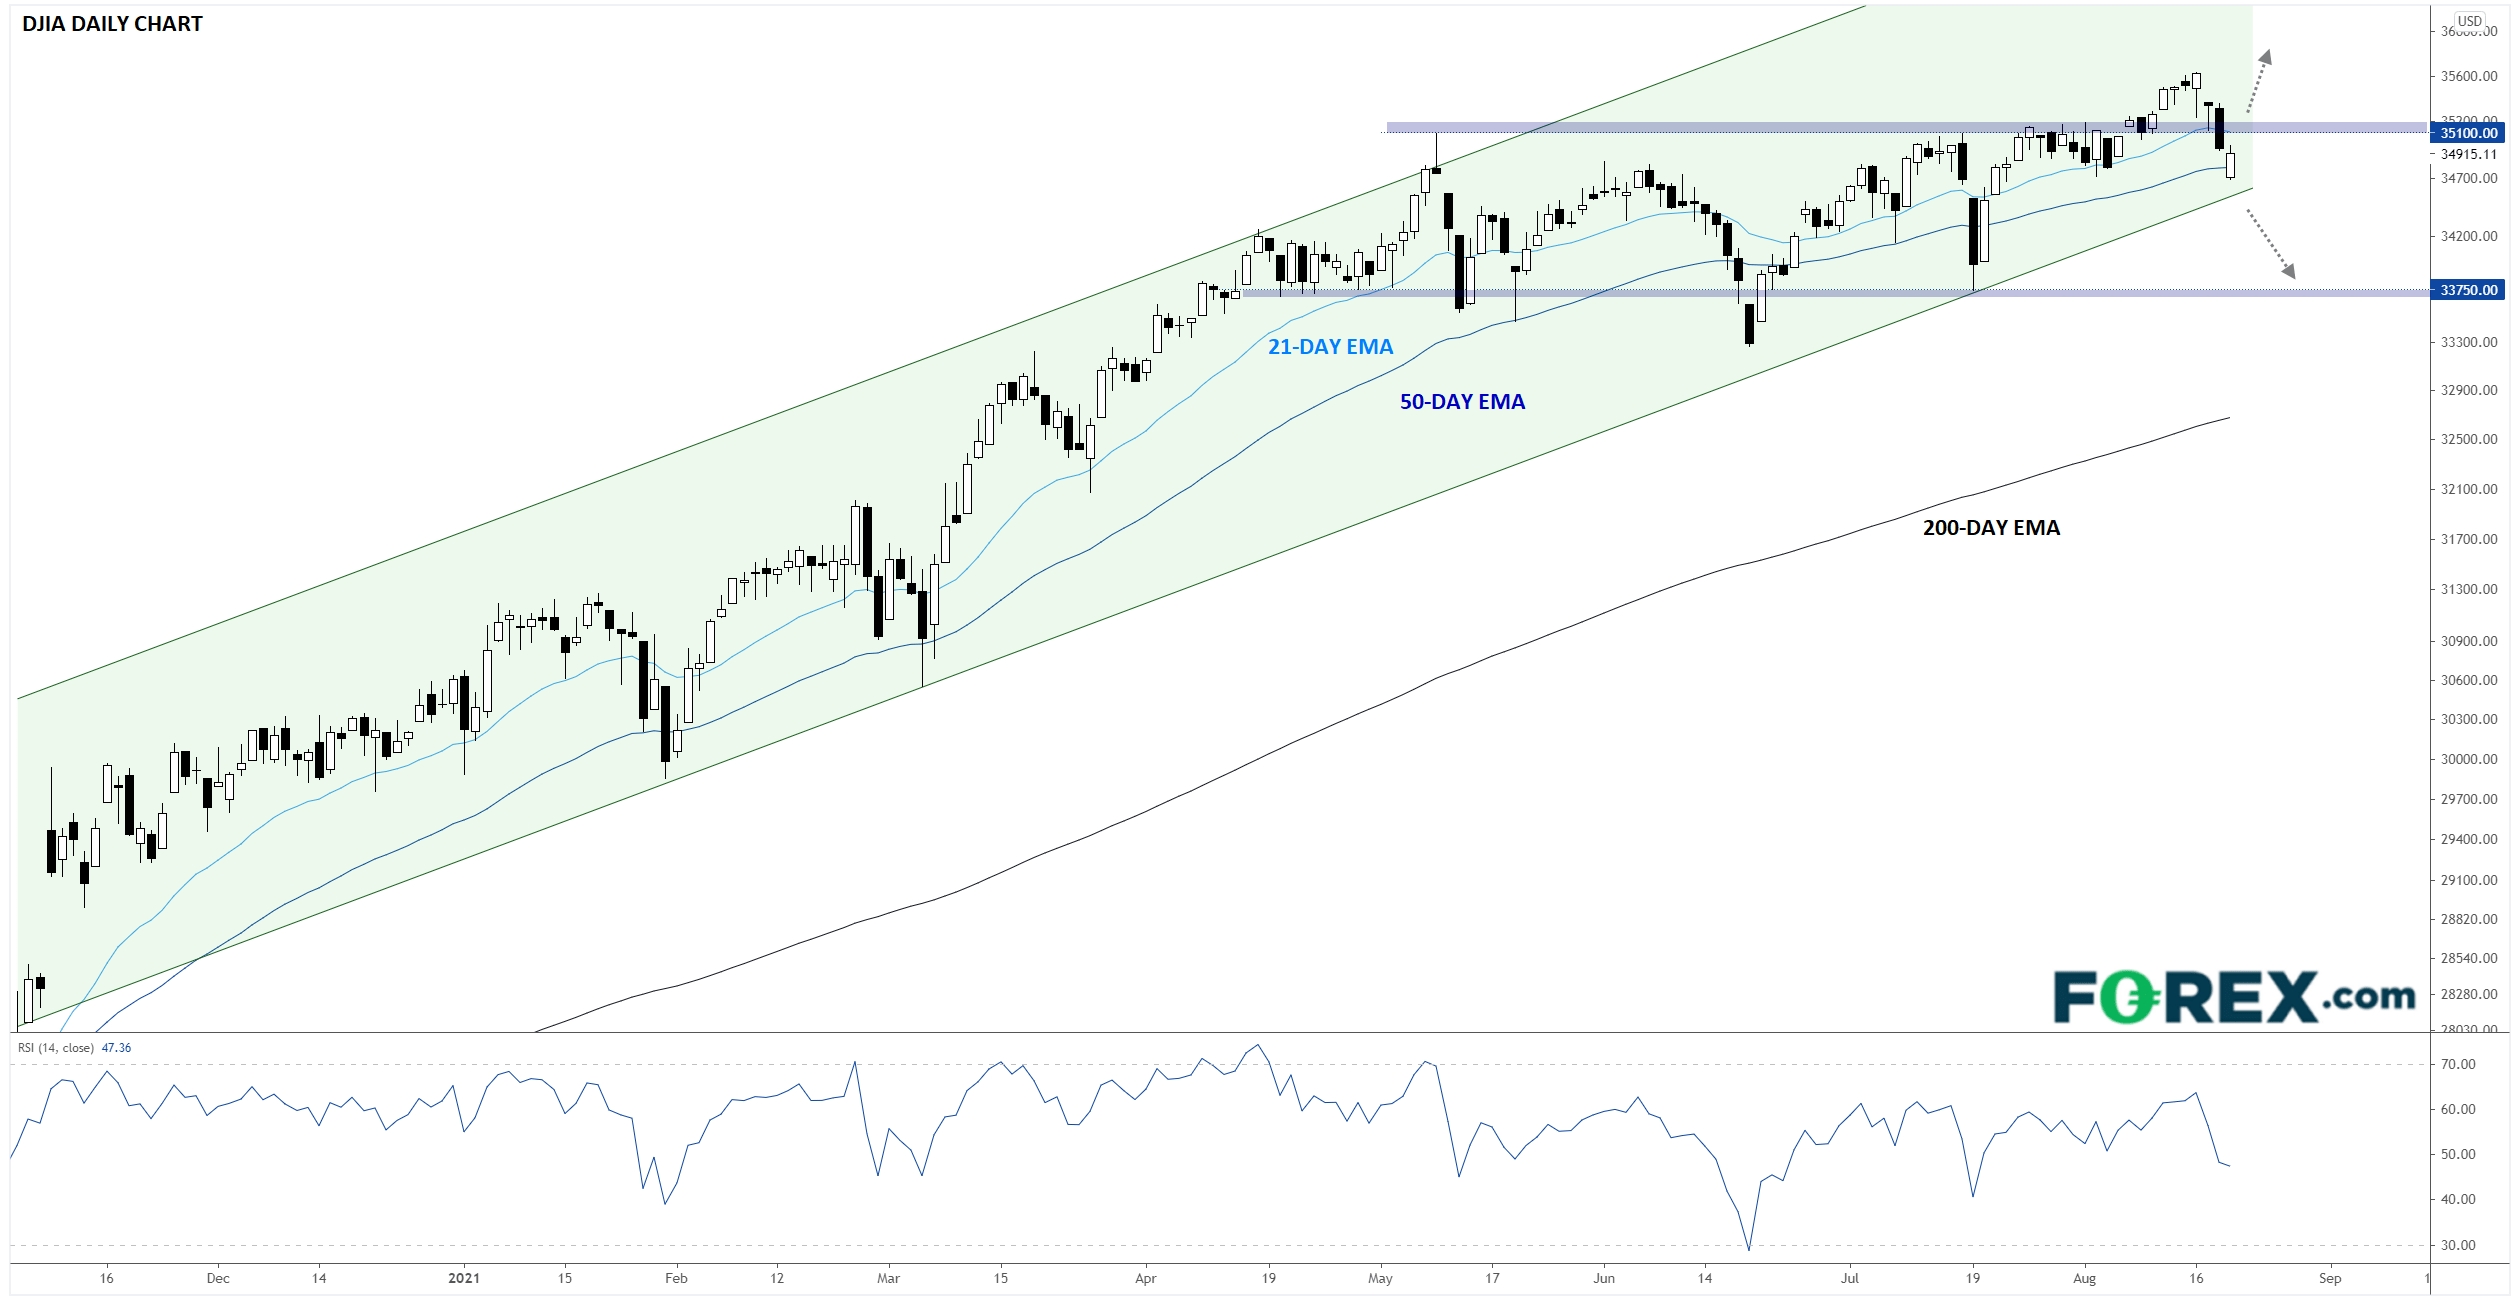 Market chart showing the DJIA daily with a positive trend Published August 2021 by FOREX.com